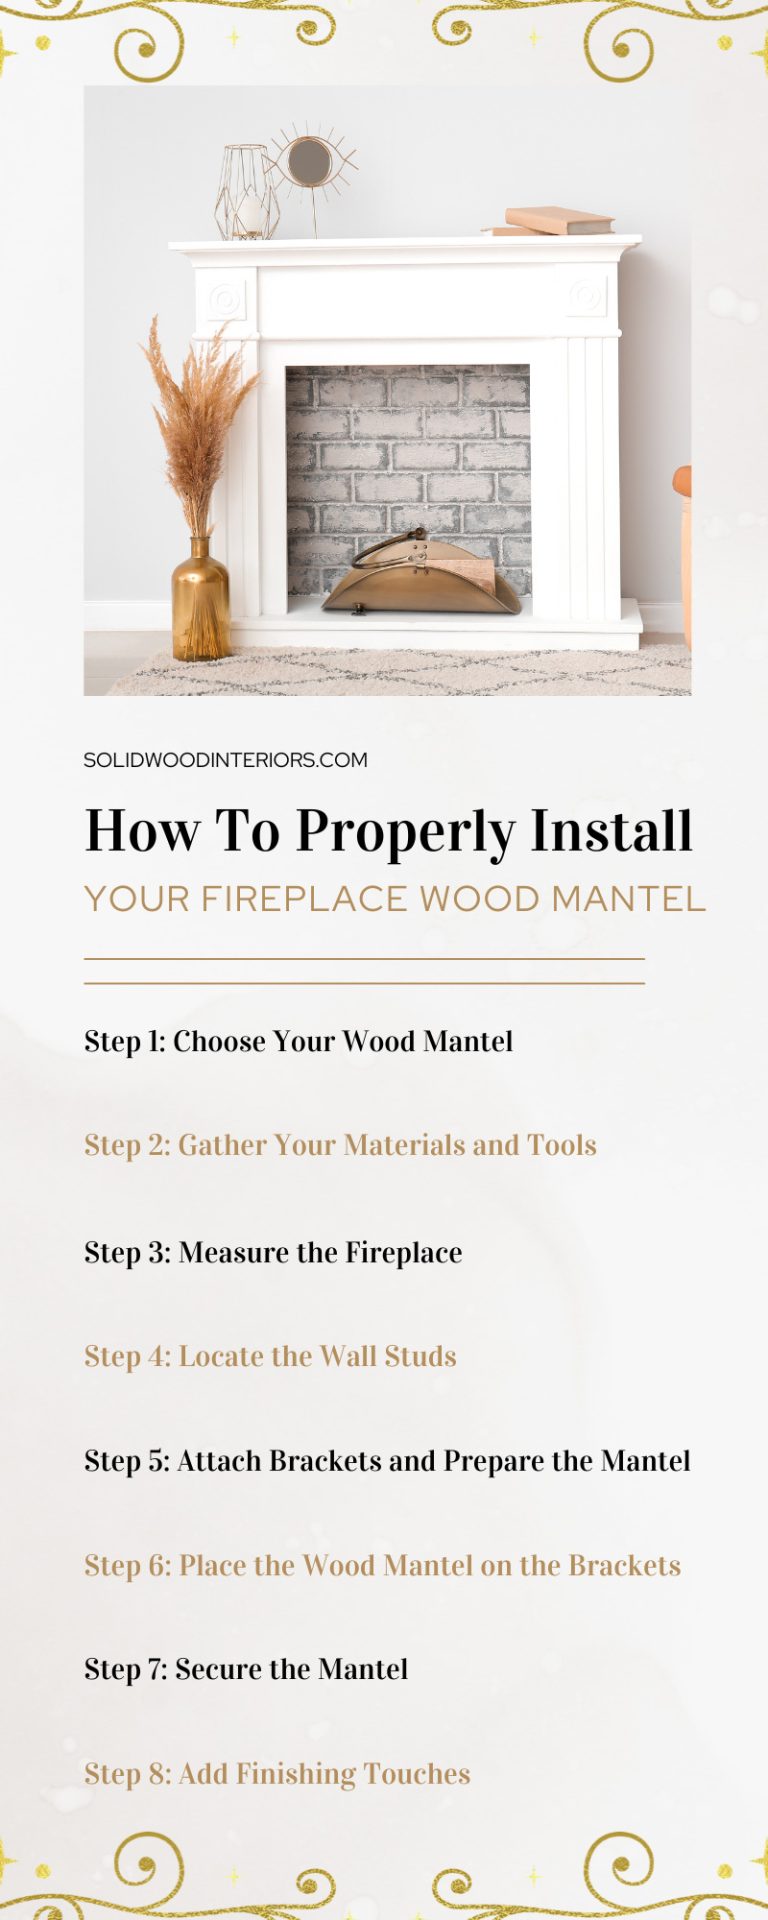 How To Properly Install Your Fireplace Wood Mantel